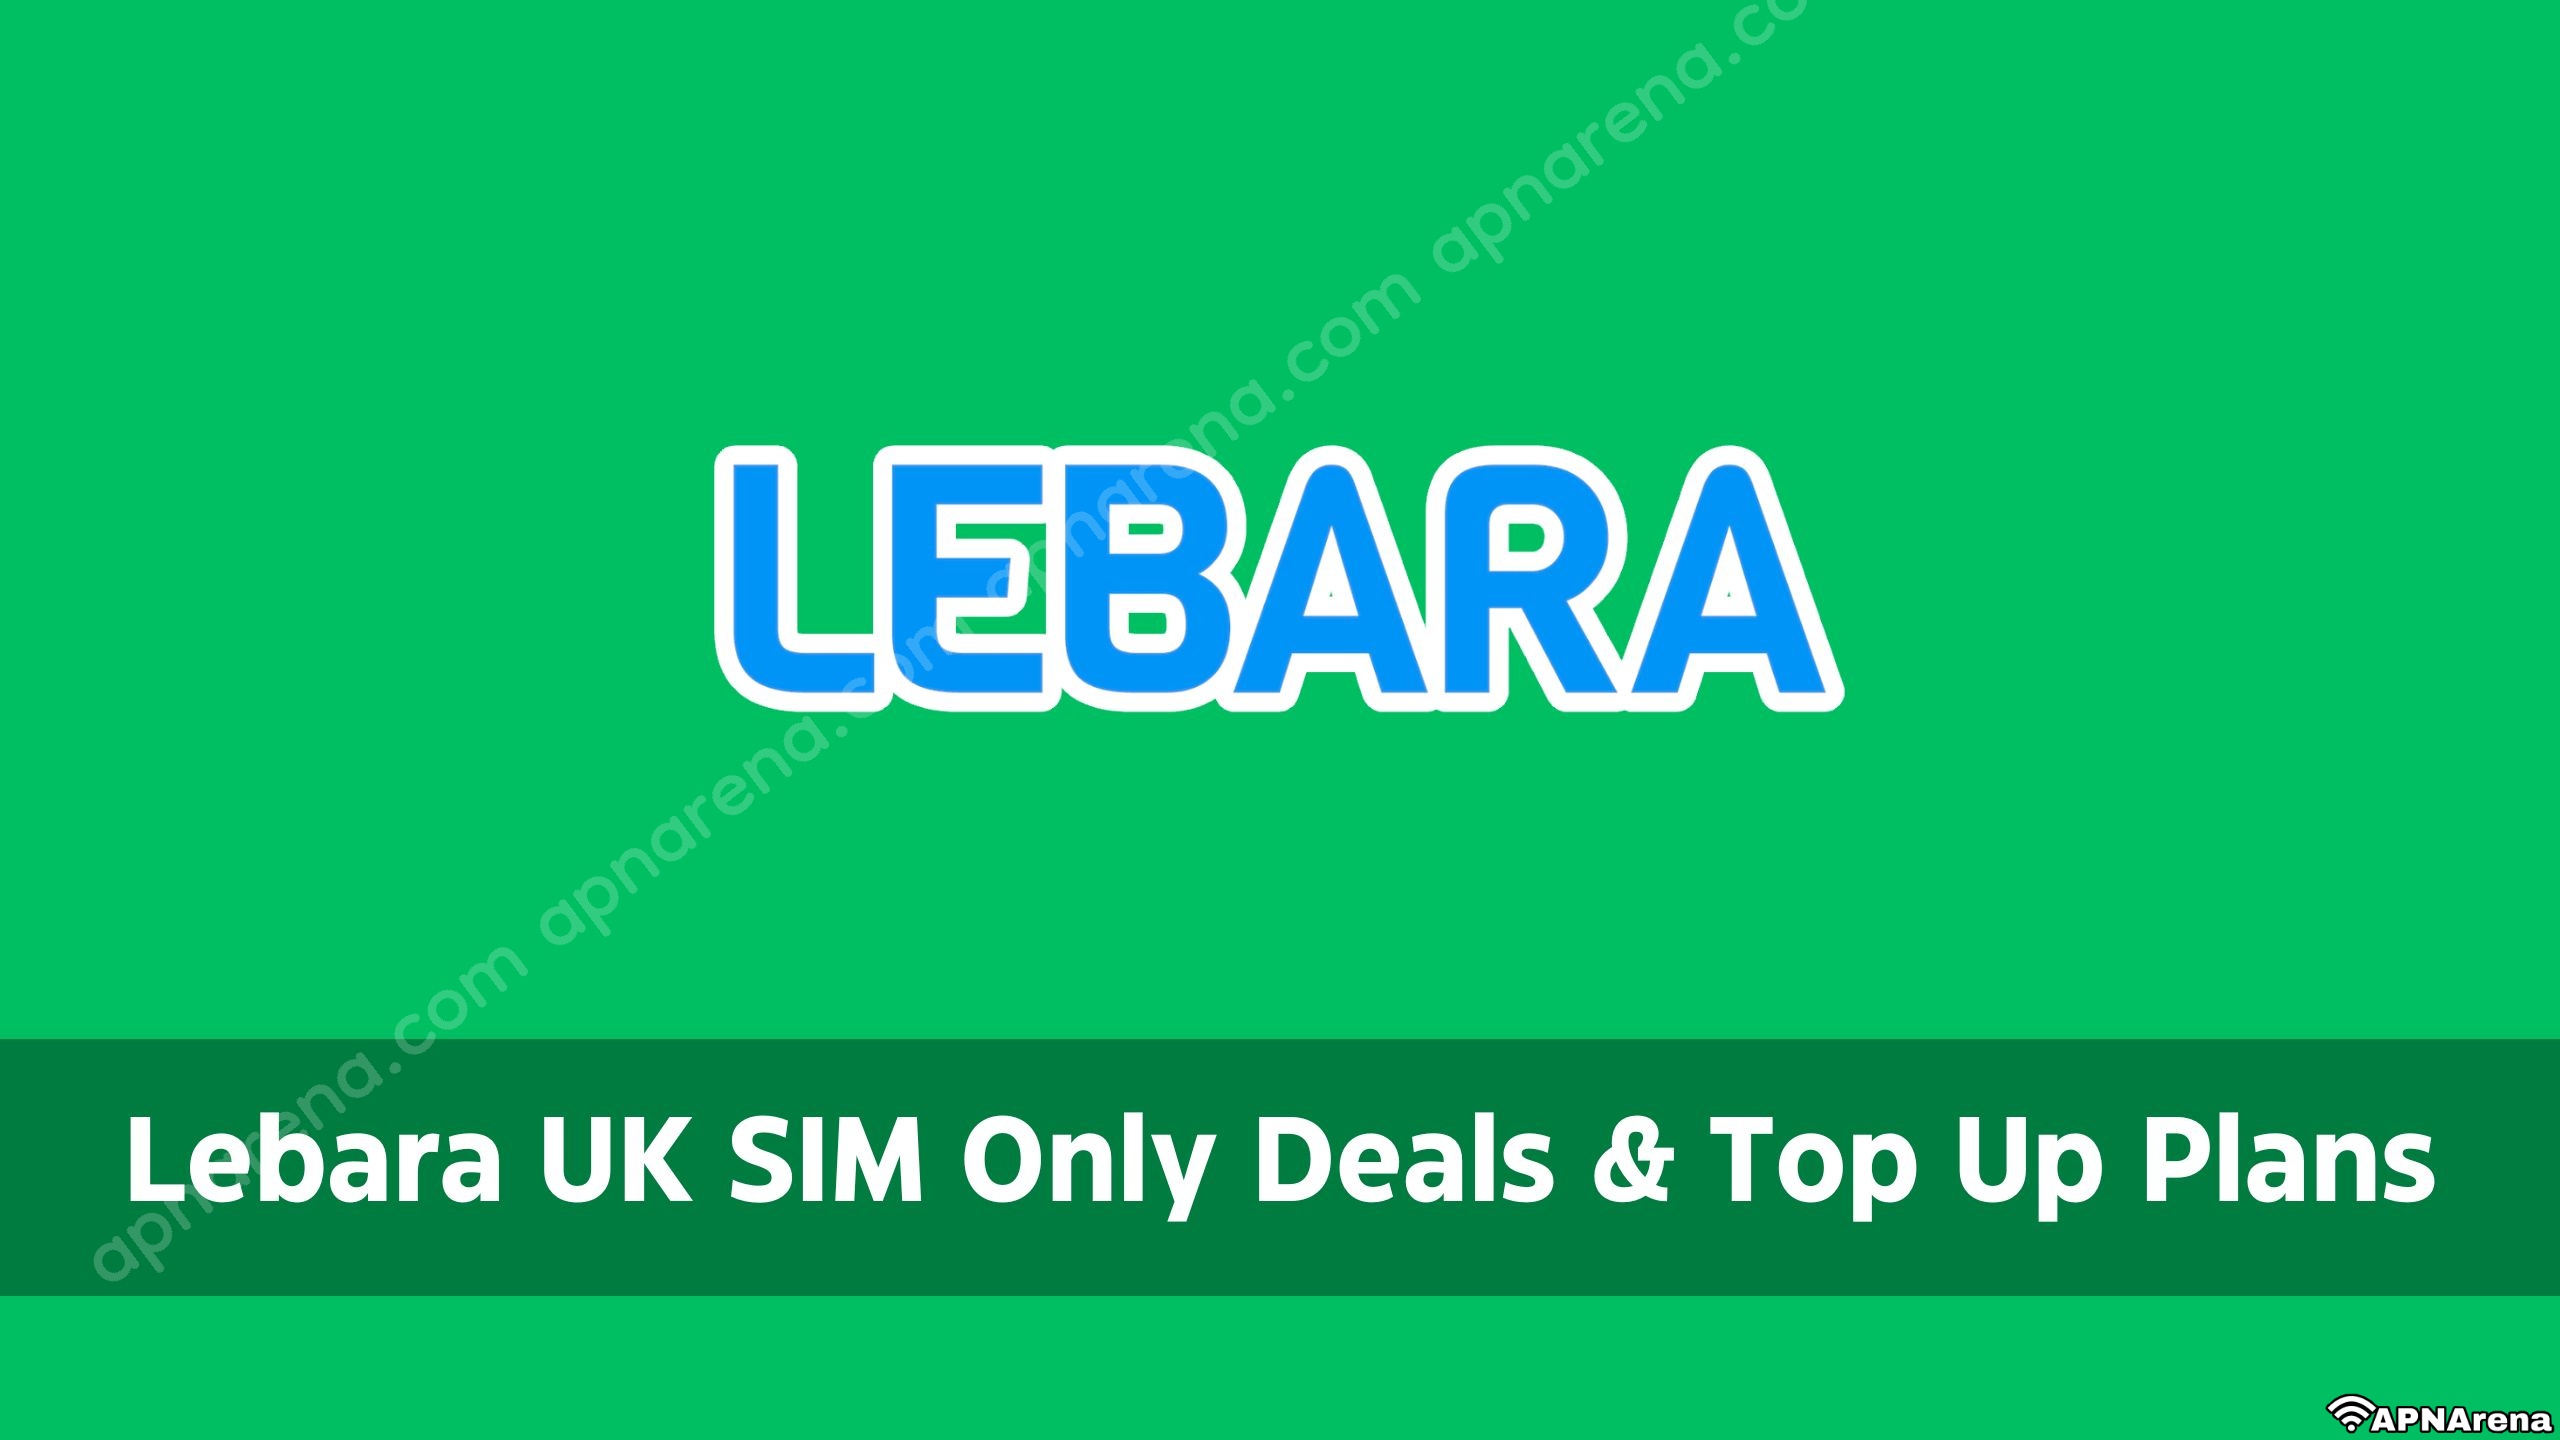 Lebara UK SIM Only Deals and Top Up Plans including| Unlimited Internet, Calls and Texts Promo